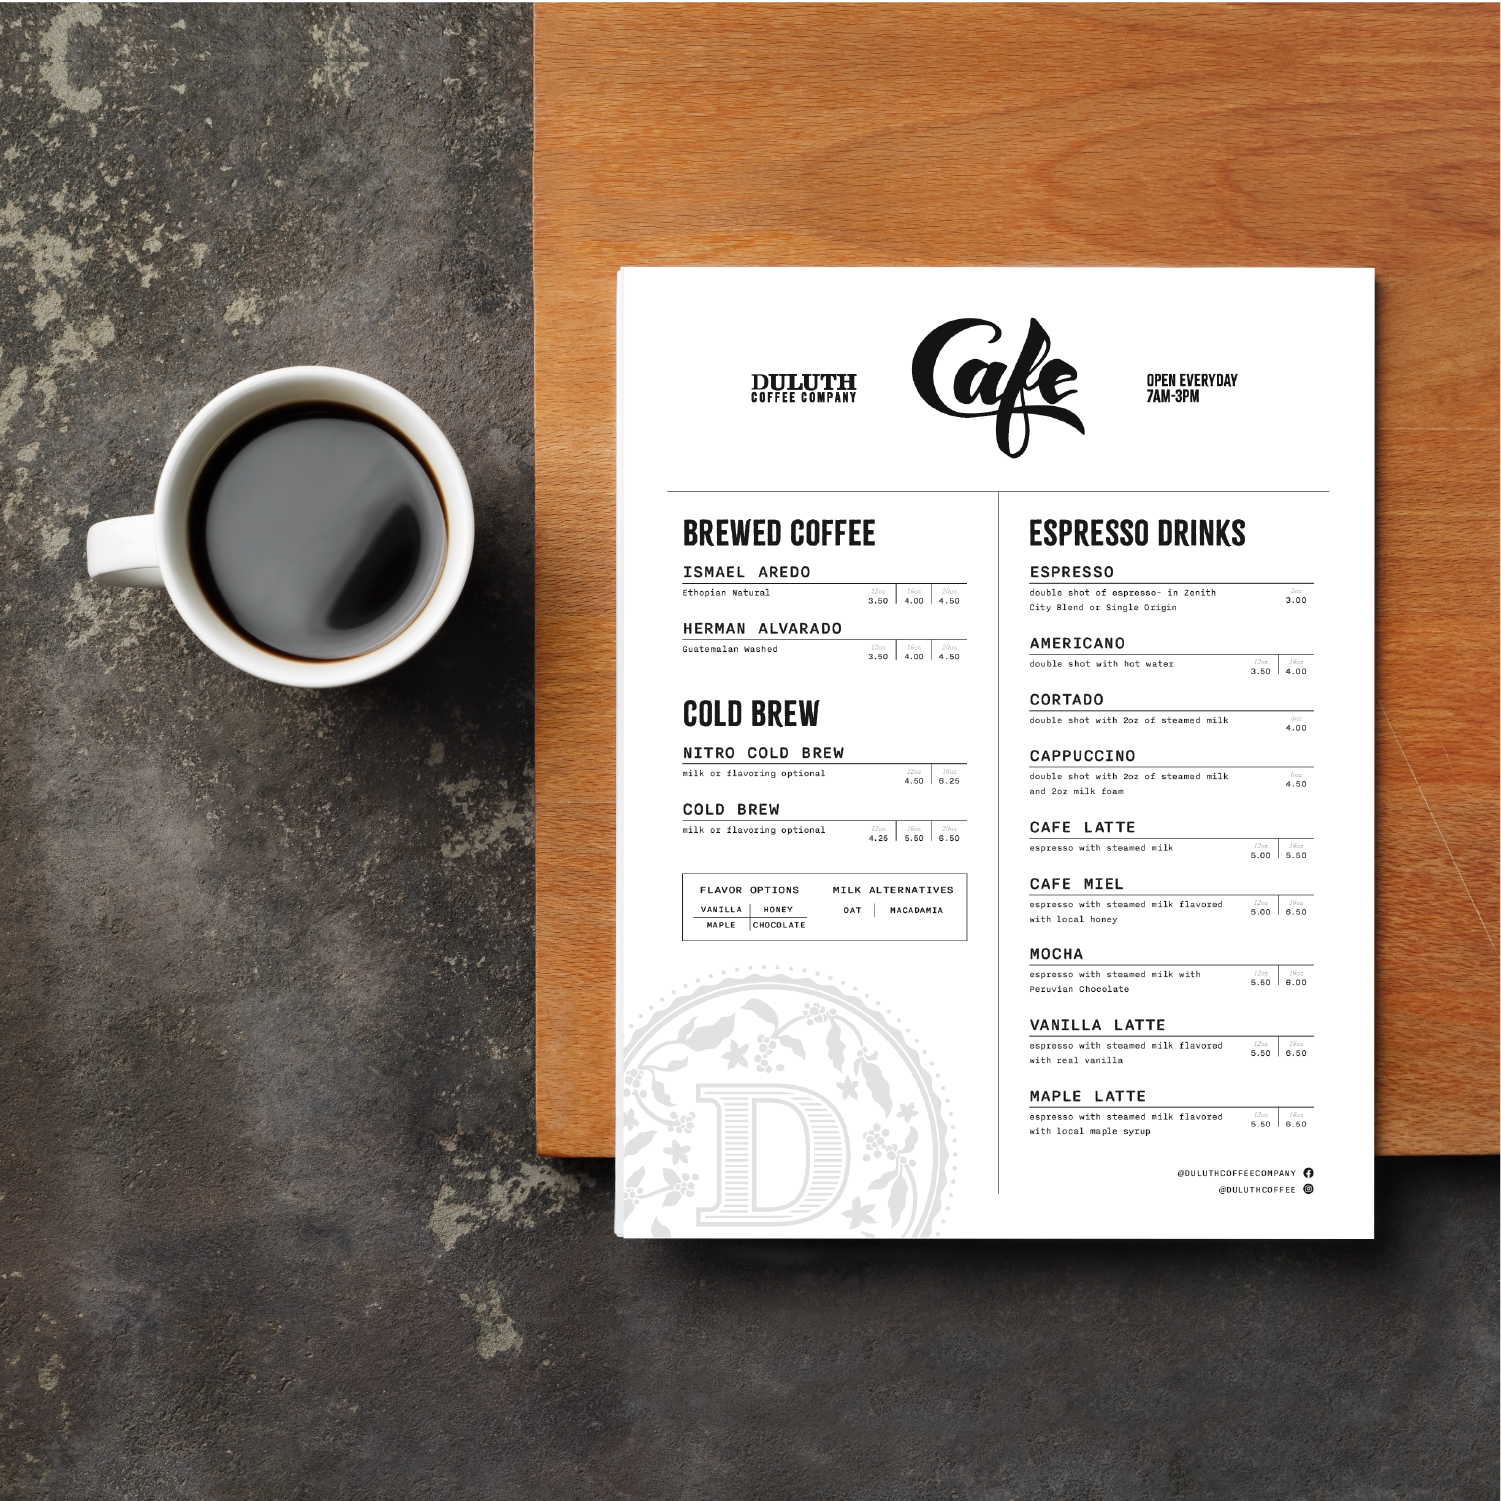 Duluth Coffee Co printed cafe menu design next to cup of coffee, created by Šek Design Studio